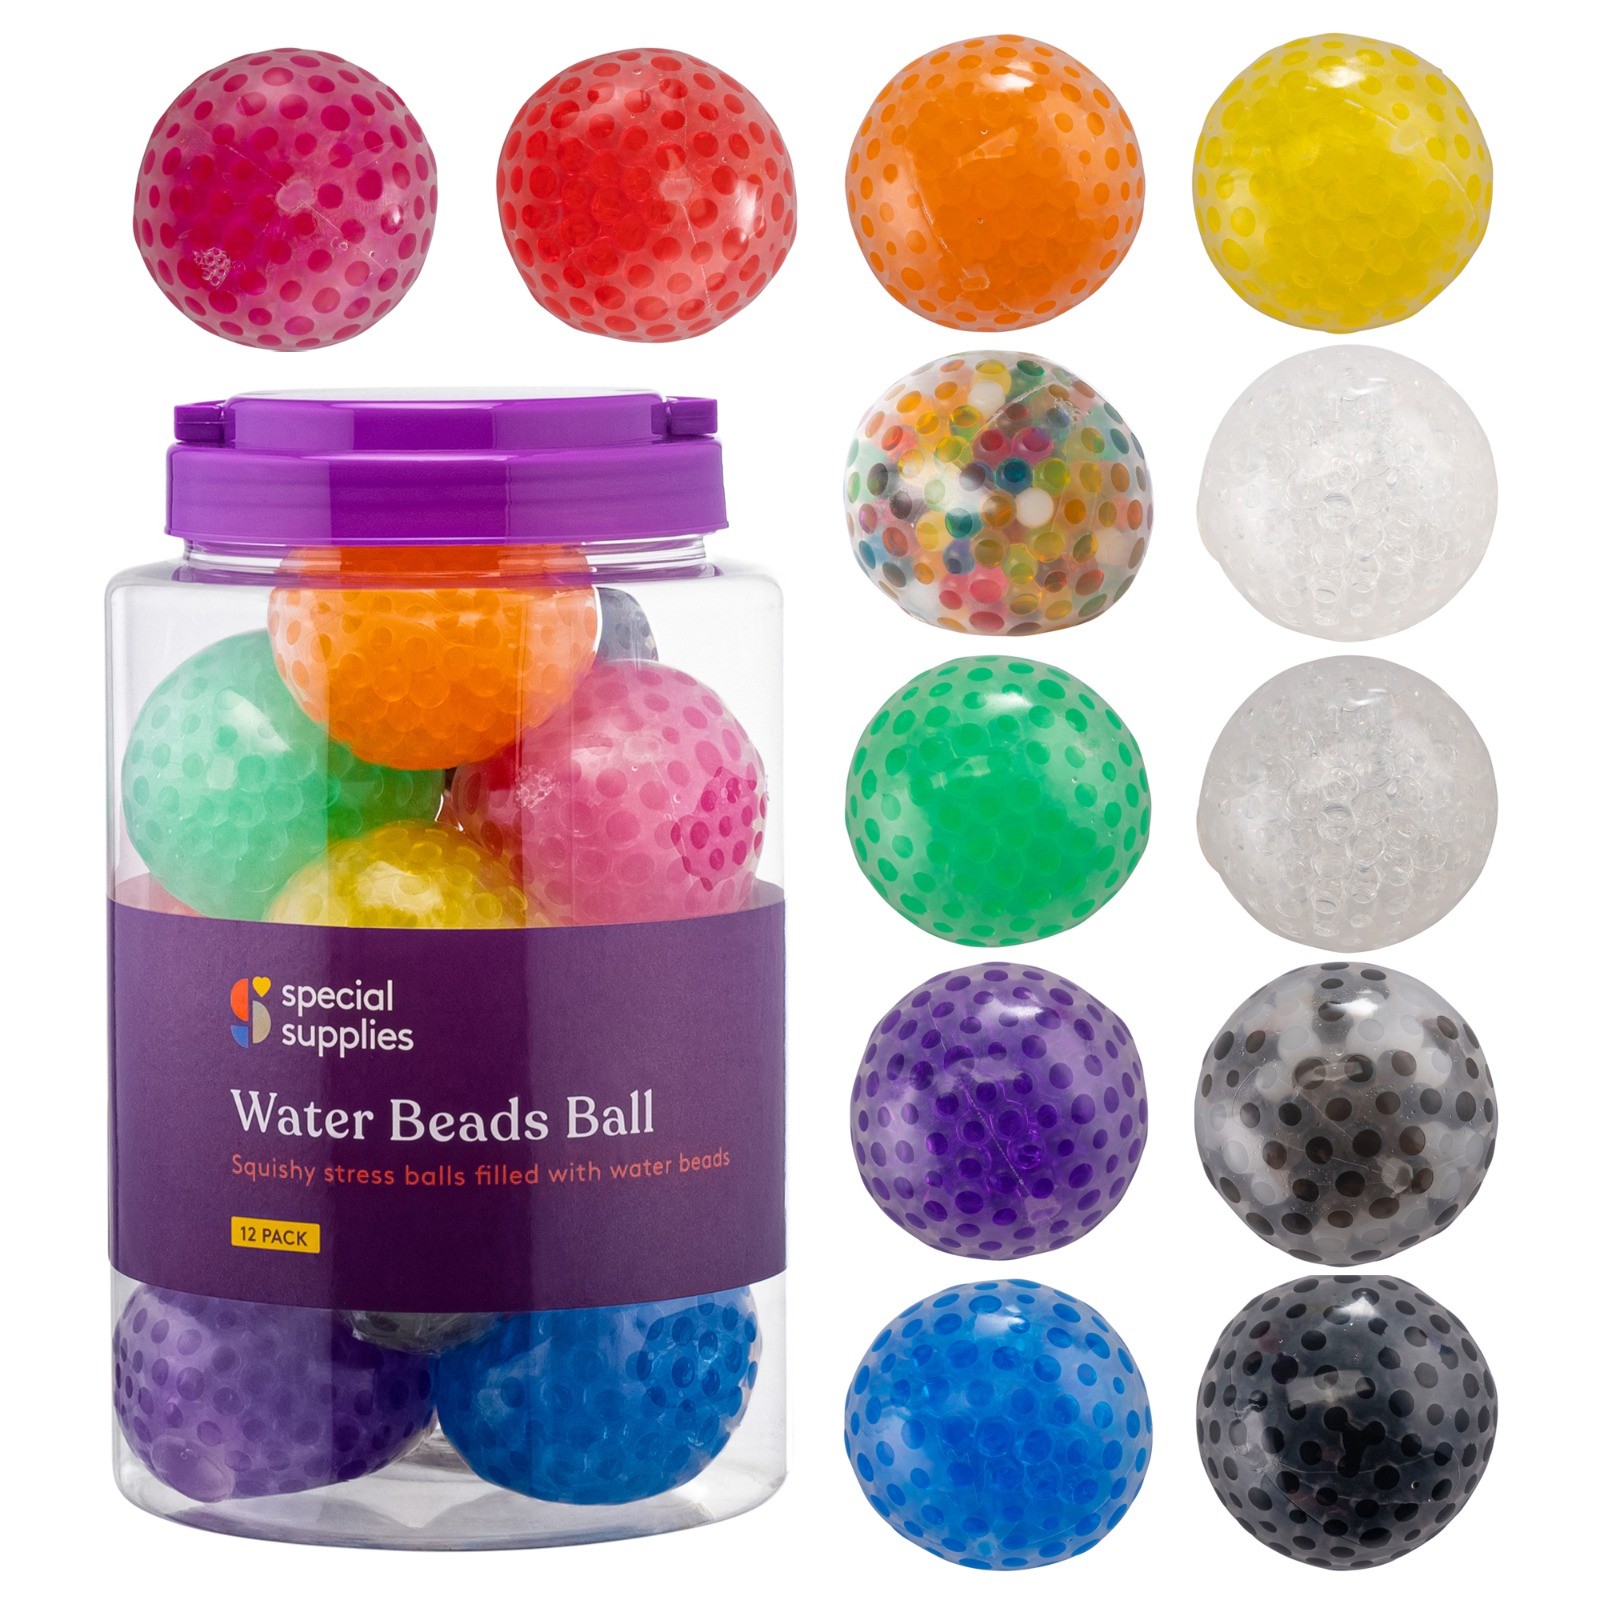 Special Supplies Squish Water Beads Stress Ball (12-Pack) Squeeze